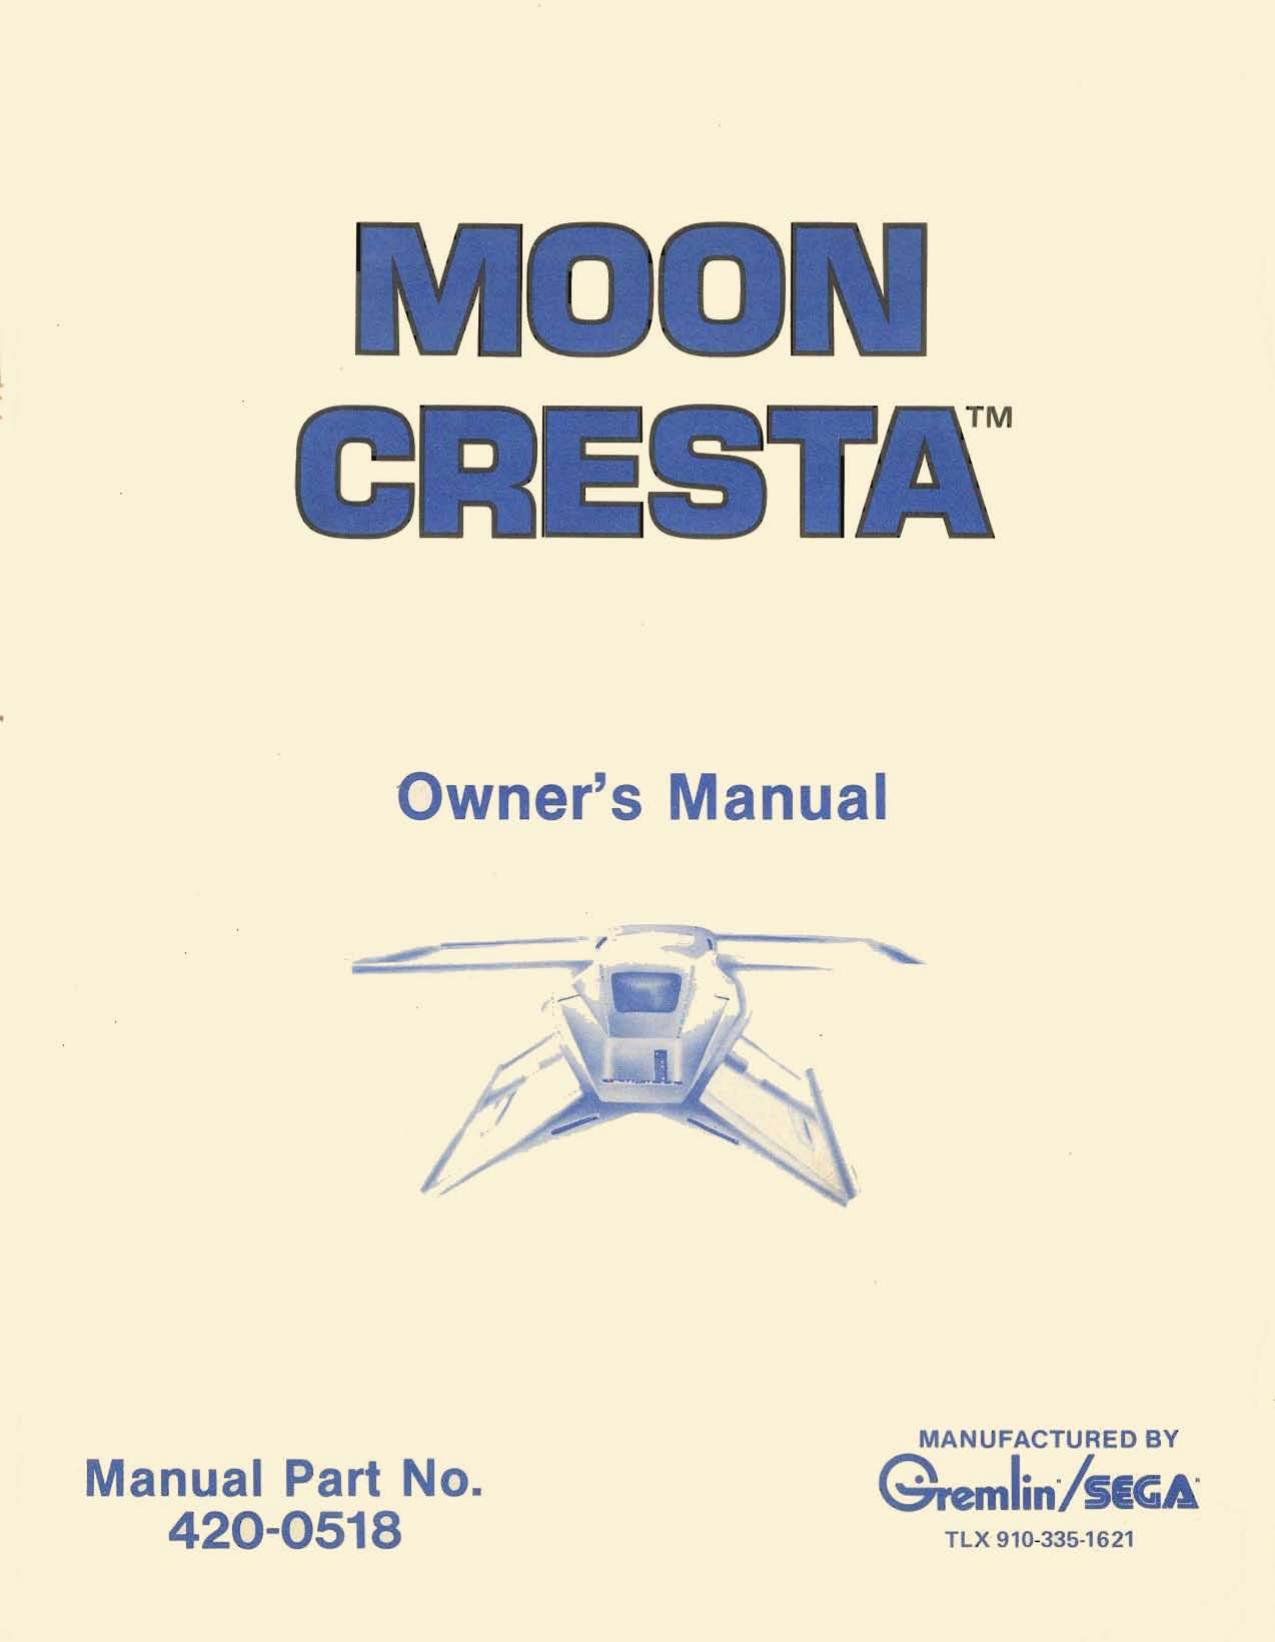 Moon Cresta Owners Manual (420-0518)